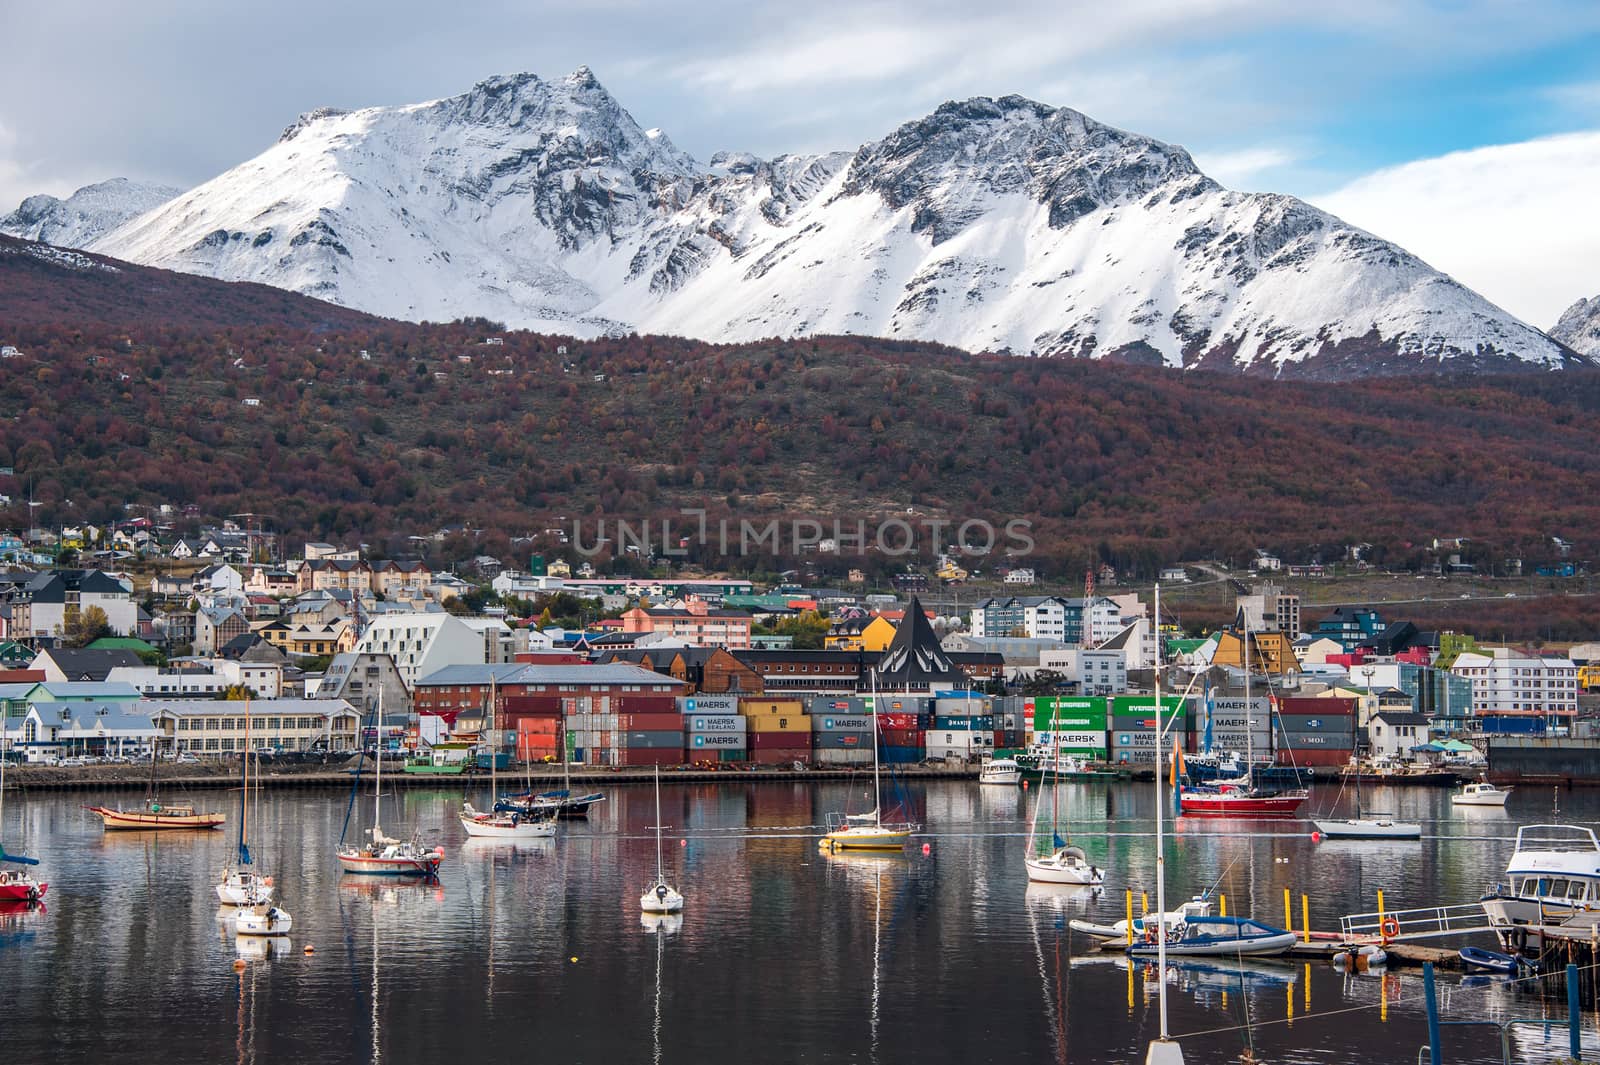 Reflection of the most southern city of Argentina in serene morning water of the Beagle Channel.
Ushuaia is the capital of the Argentine province of Tierra del Fuego. Ushuaia is located in a wide bay on the southern coast of the island of Tierra del Fuego, bounded on the north by the Martial mountain range and on the south by the Beagle Channel.  